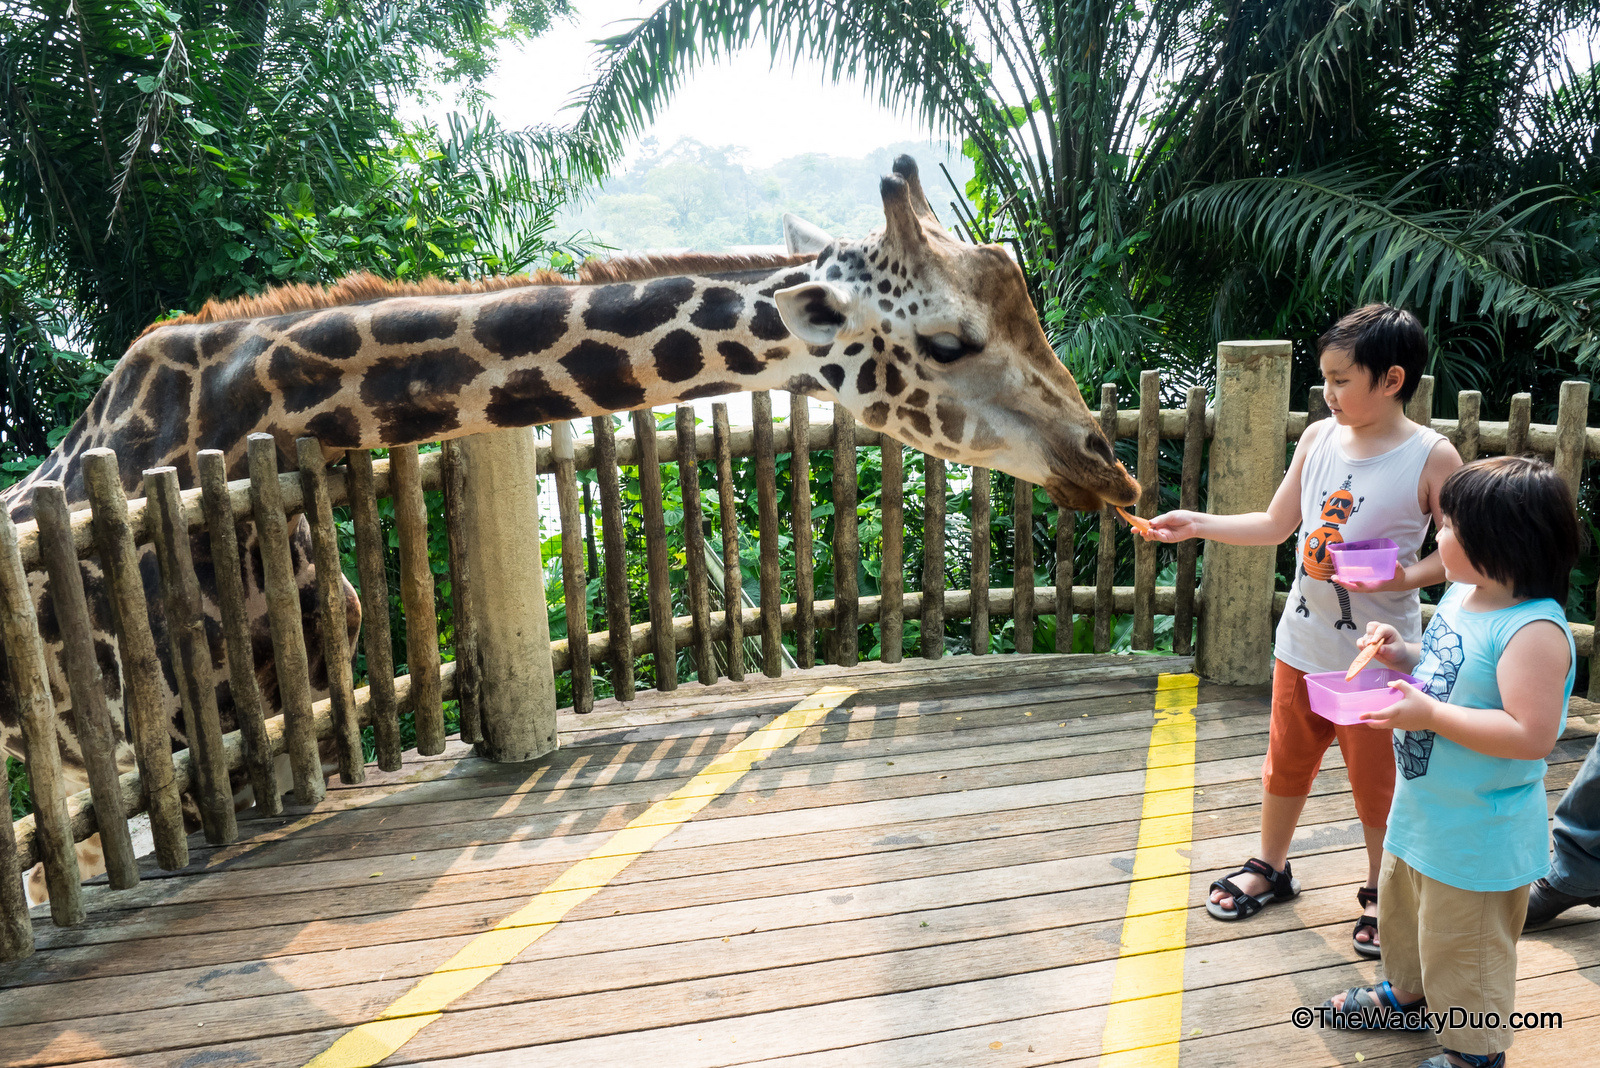 The Animal Resort Is Singapore's Own 'Kampung Zoo' And It's Completely Free